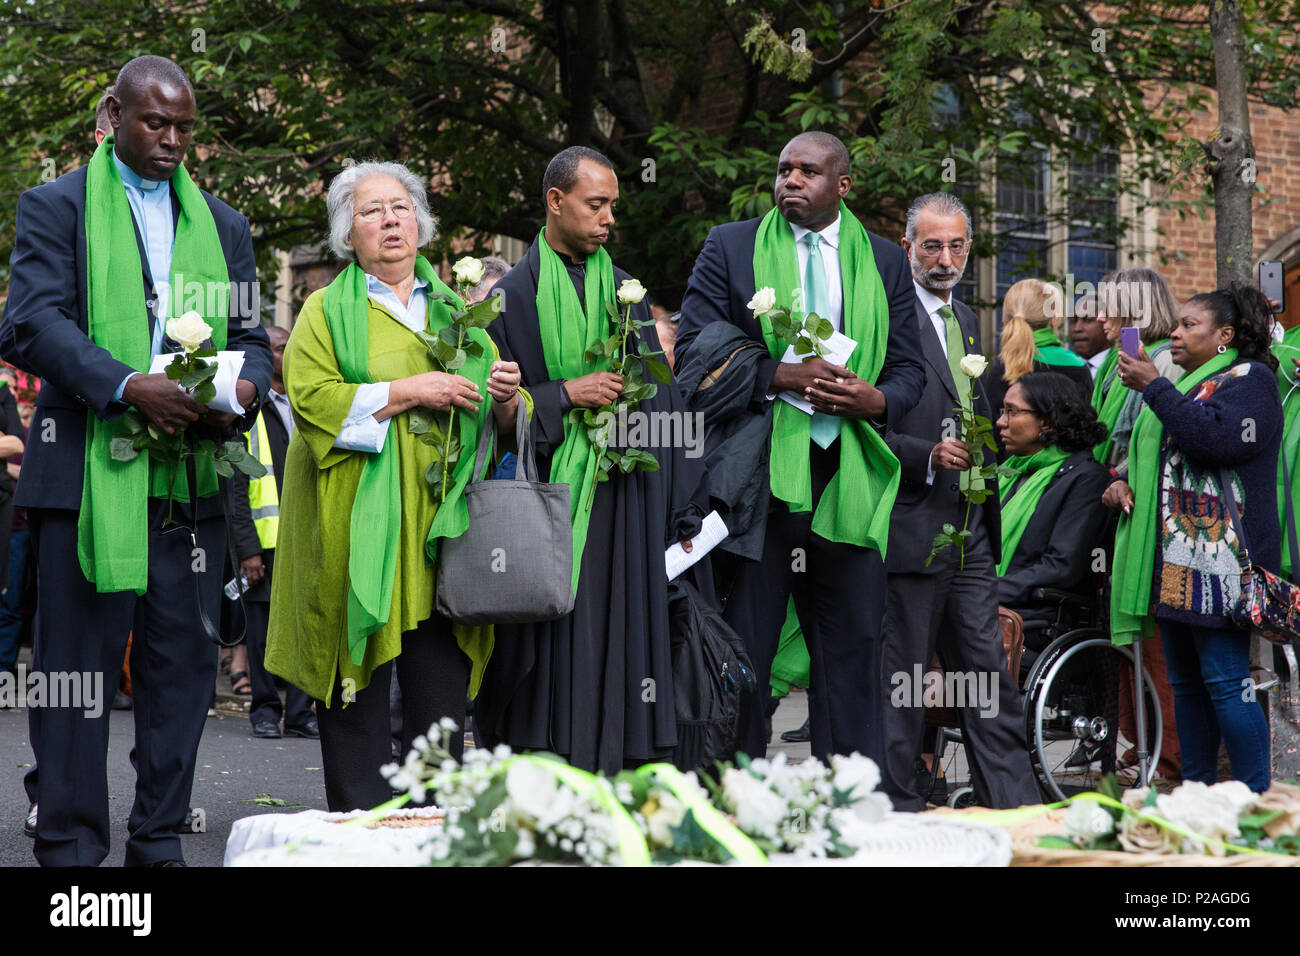 London, UK. 14th June, 2018. Faith leaders and politicians hold flowers outside St Helen's Church before doves are released to mark the first anniversary of the Grenfell Tower Fire. Stock Photo